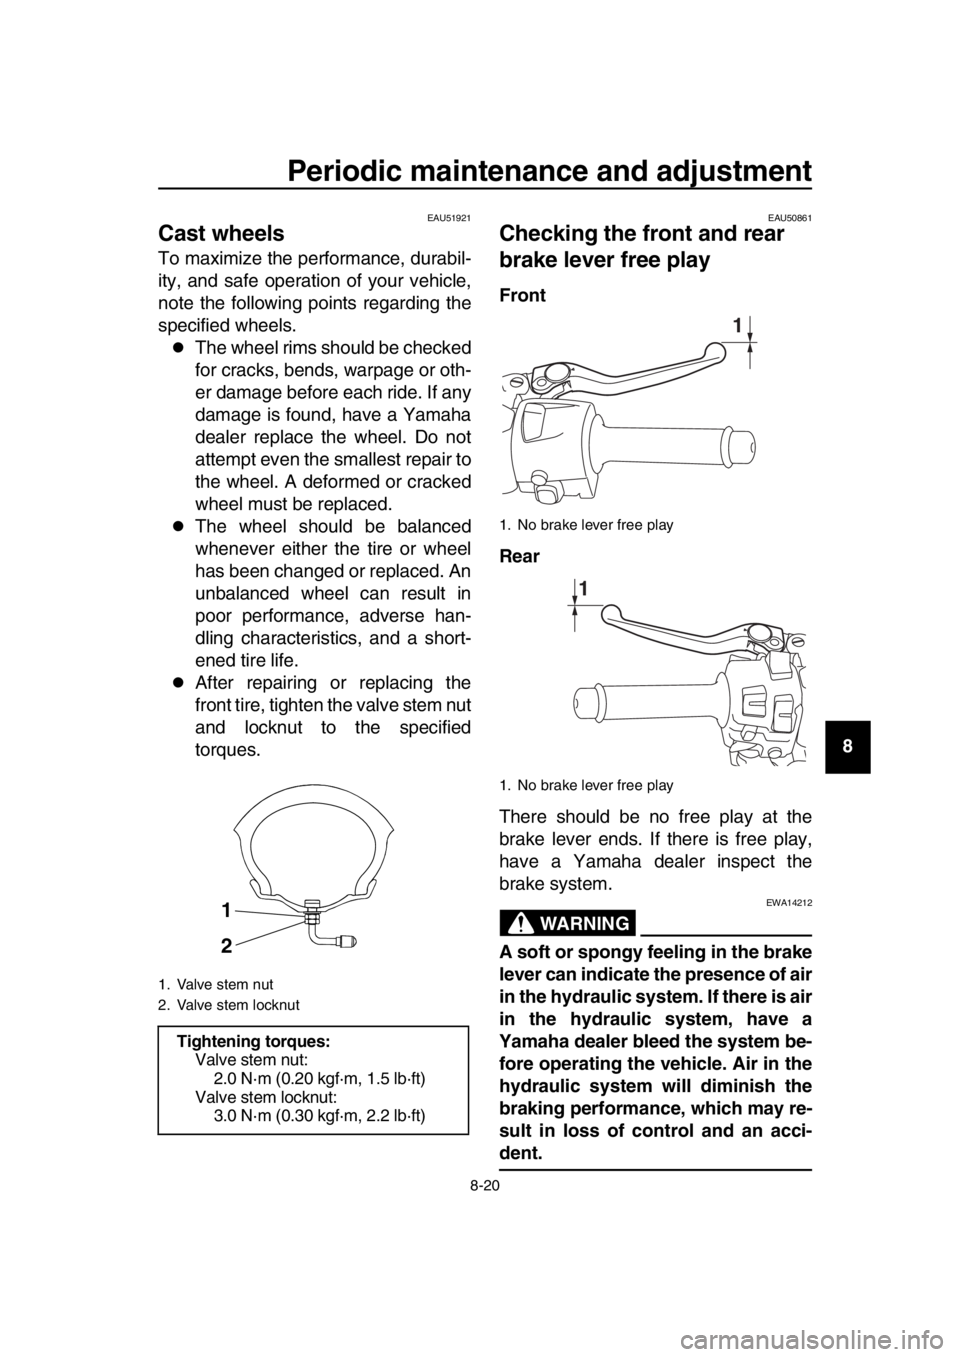 YAMAHA TMAX 2019  Owners Manual Periodic maintenance and adjustment
8-20
1
2
3
4
5
6
7
8
9
10
11
12
13
14
EAU51921
Cast wheels
To maximize the performance, durabil-
ity, and safe operation of your vehicle,
note the following points 